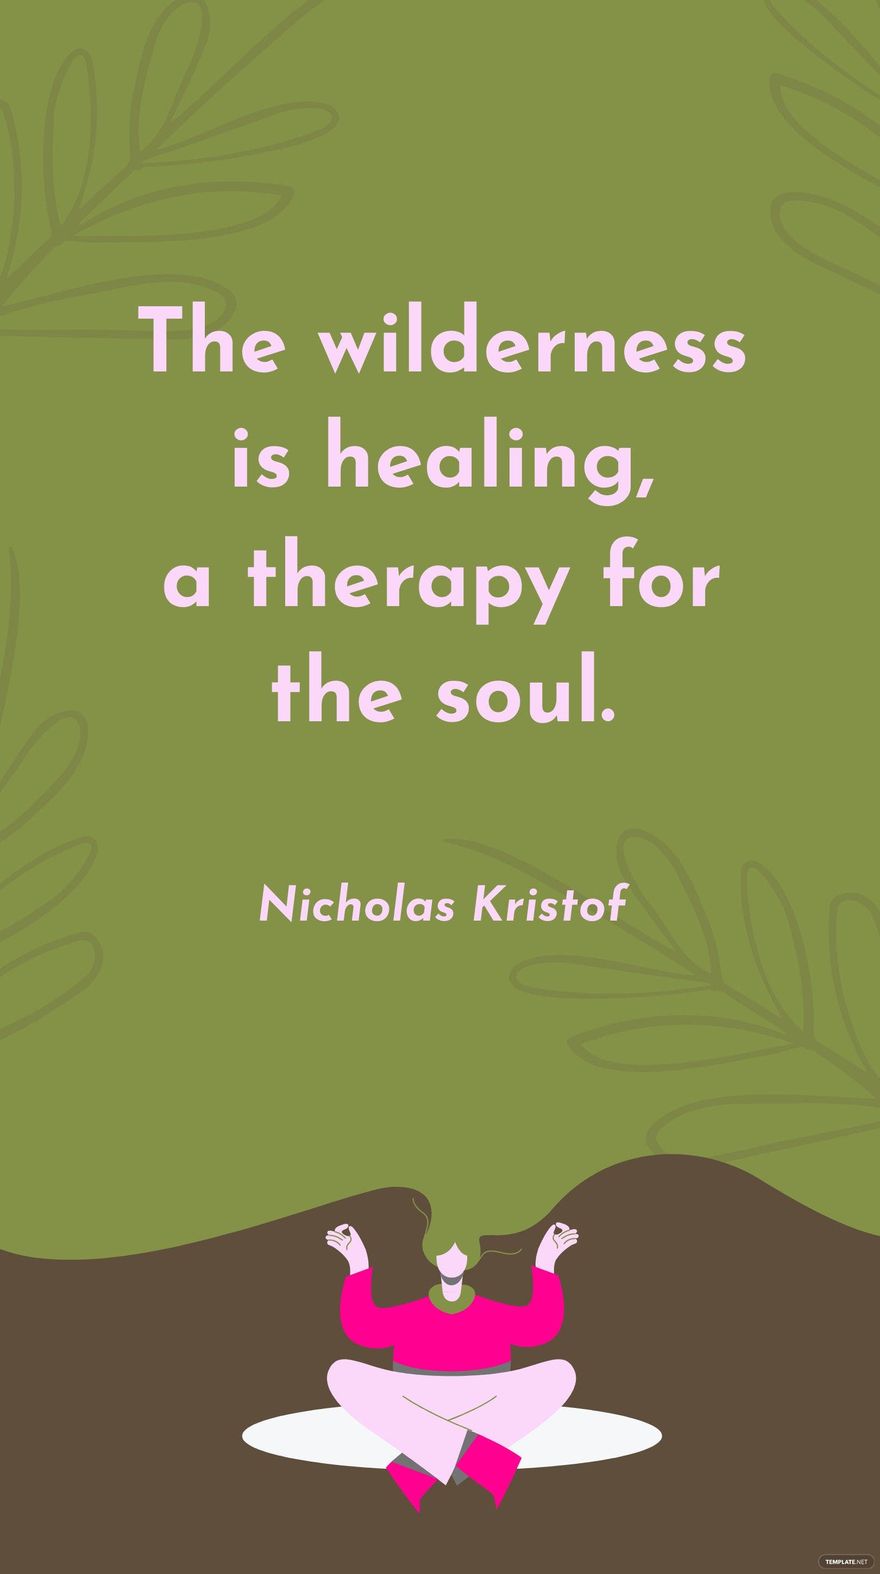 Nicholas Kristof - The wilderness is healing, a therapy for the soul. in JPG